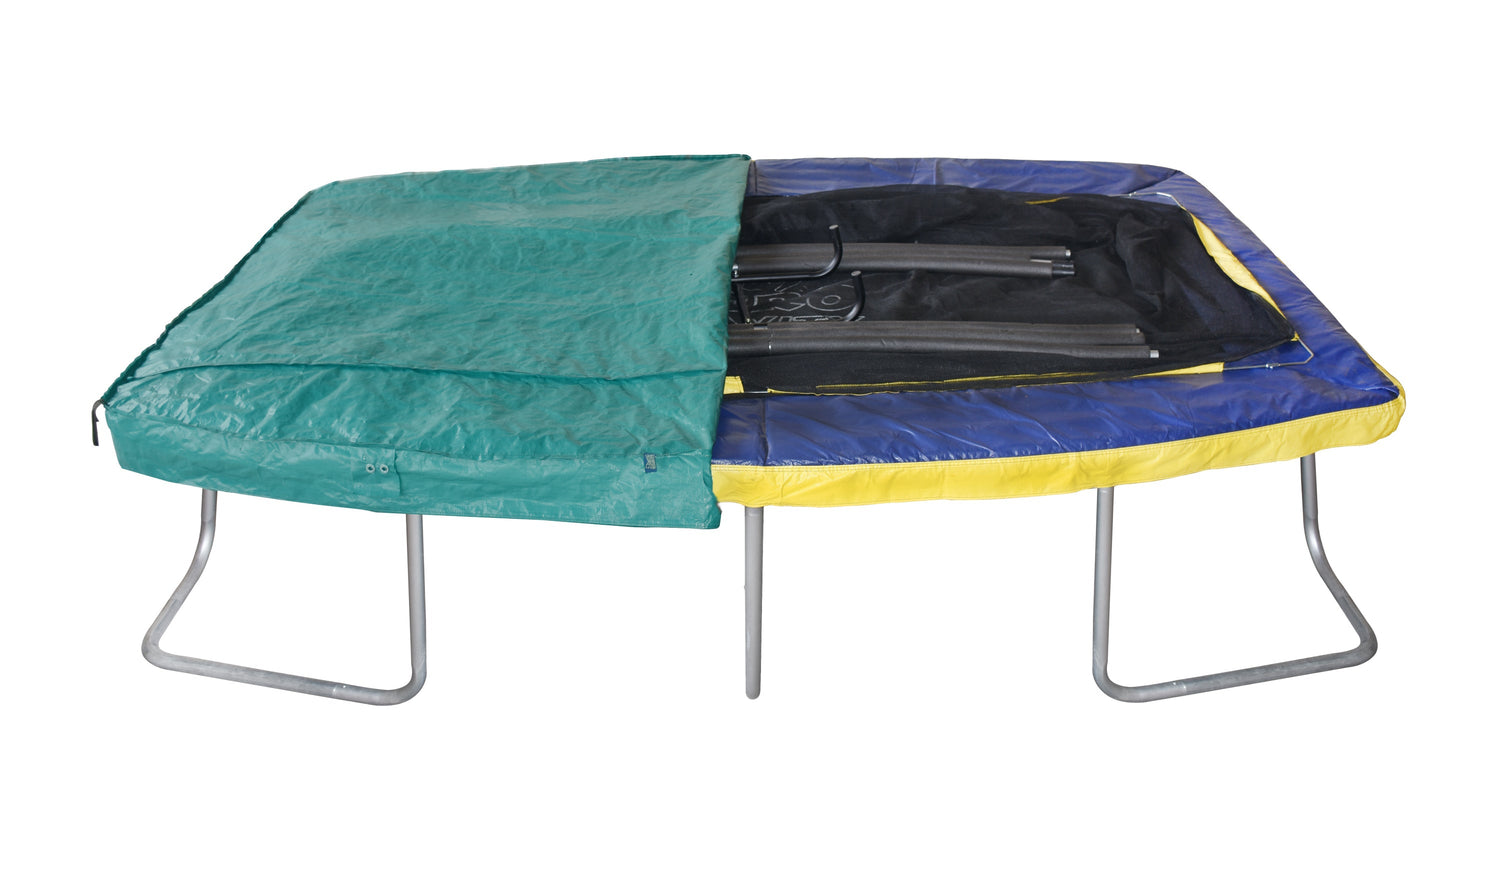 Ultima 5 10x7ft, 12x8ft, 15x10ft Heavyweight Trampoline Cover in Green